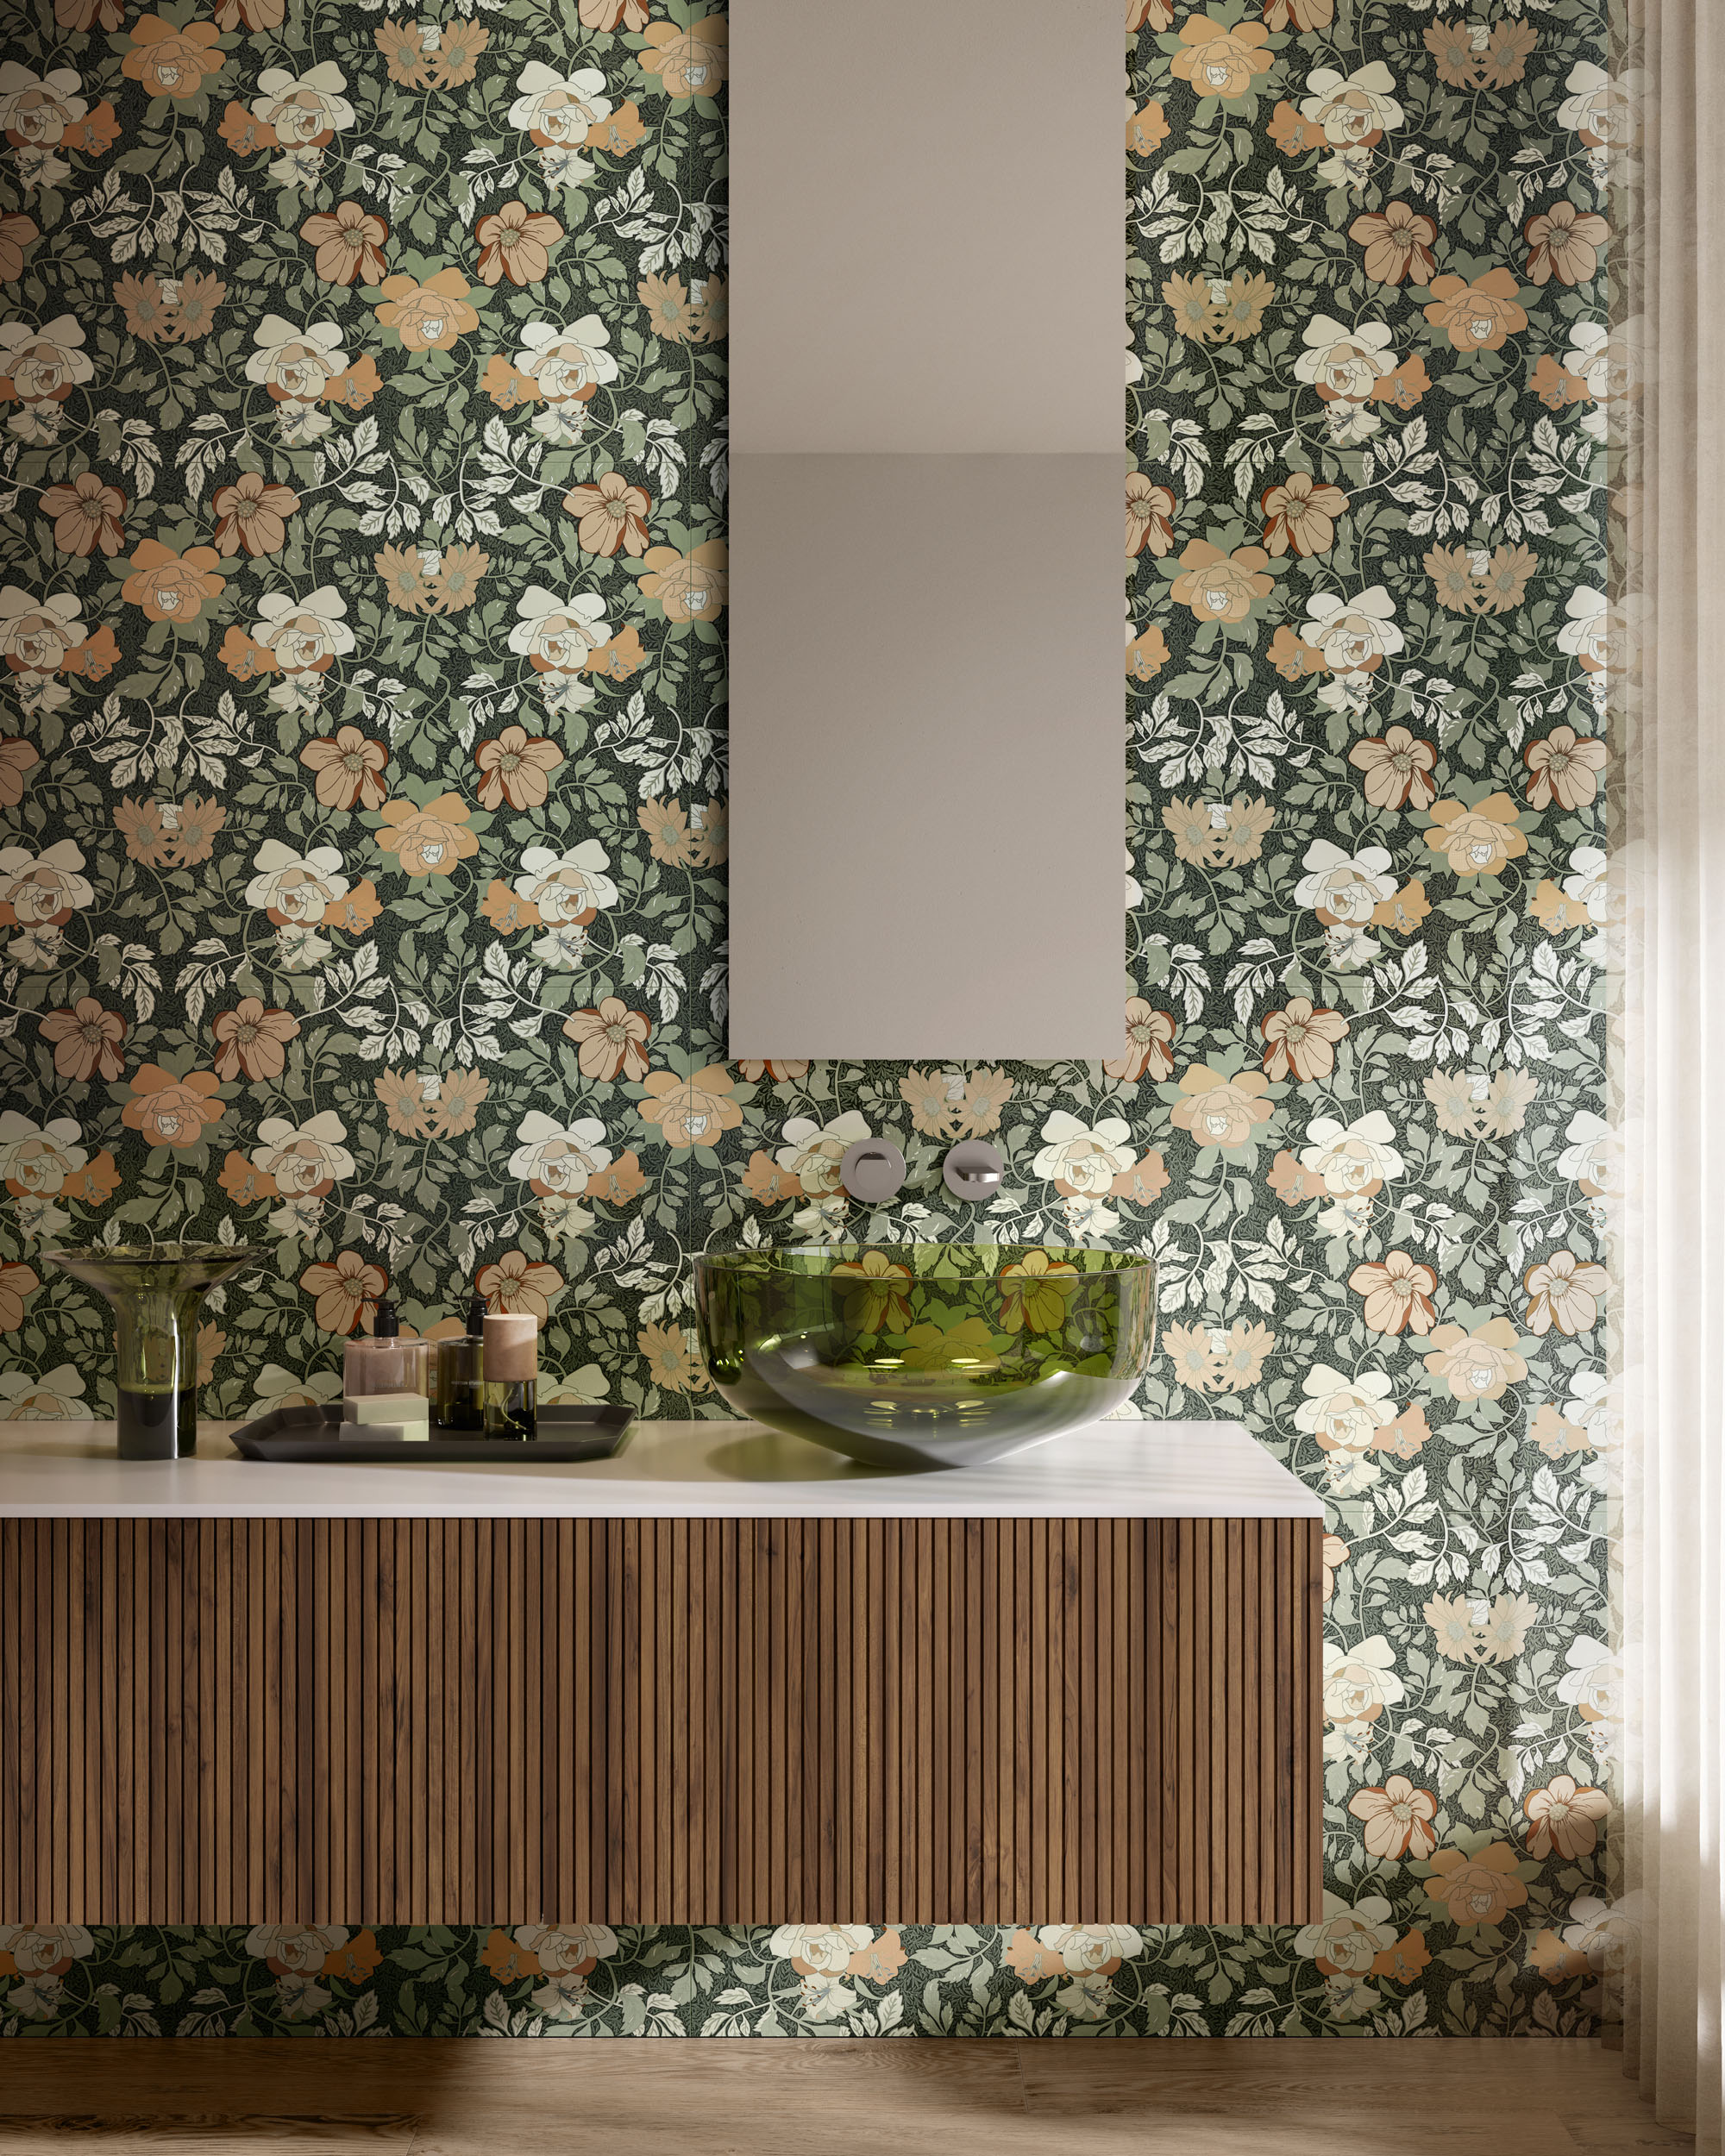 White-topped console in mounted to wall covered in green floral print ceramic tile.